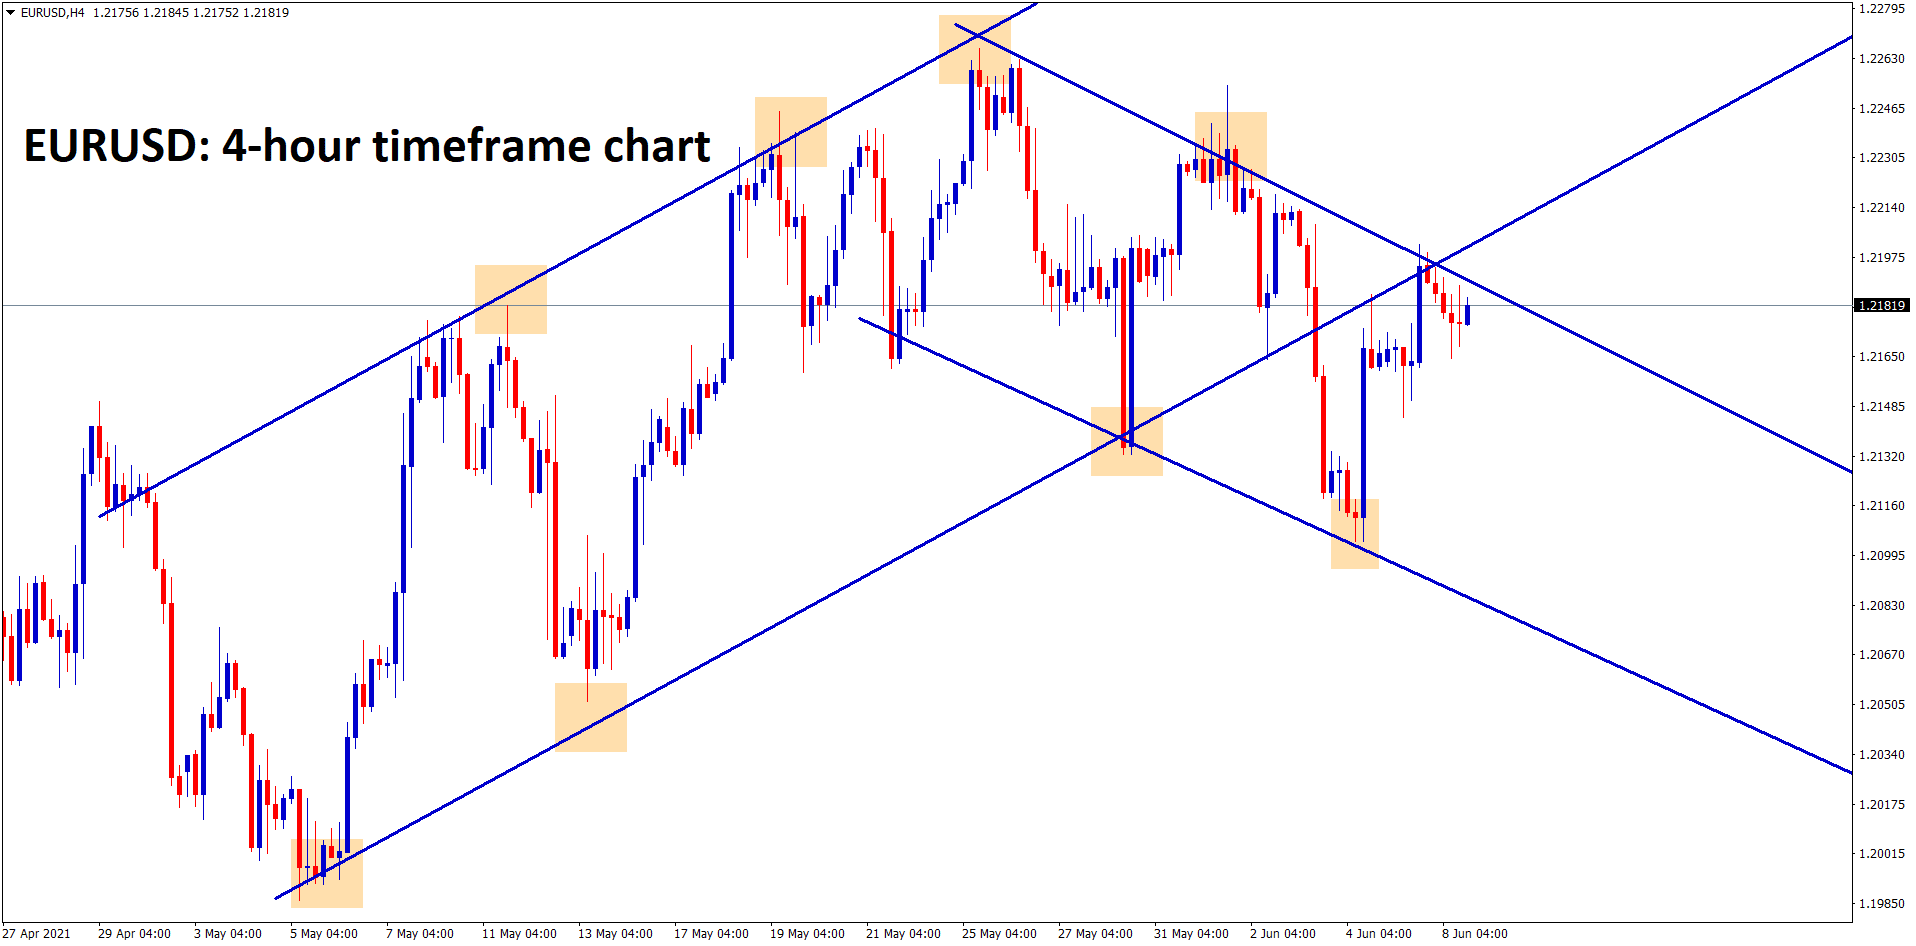 EURUSD is moving between the channel ranges for long time